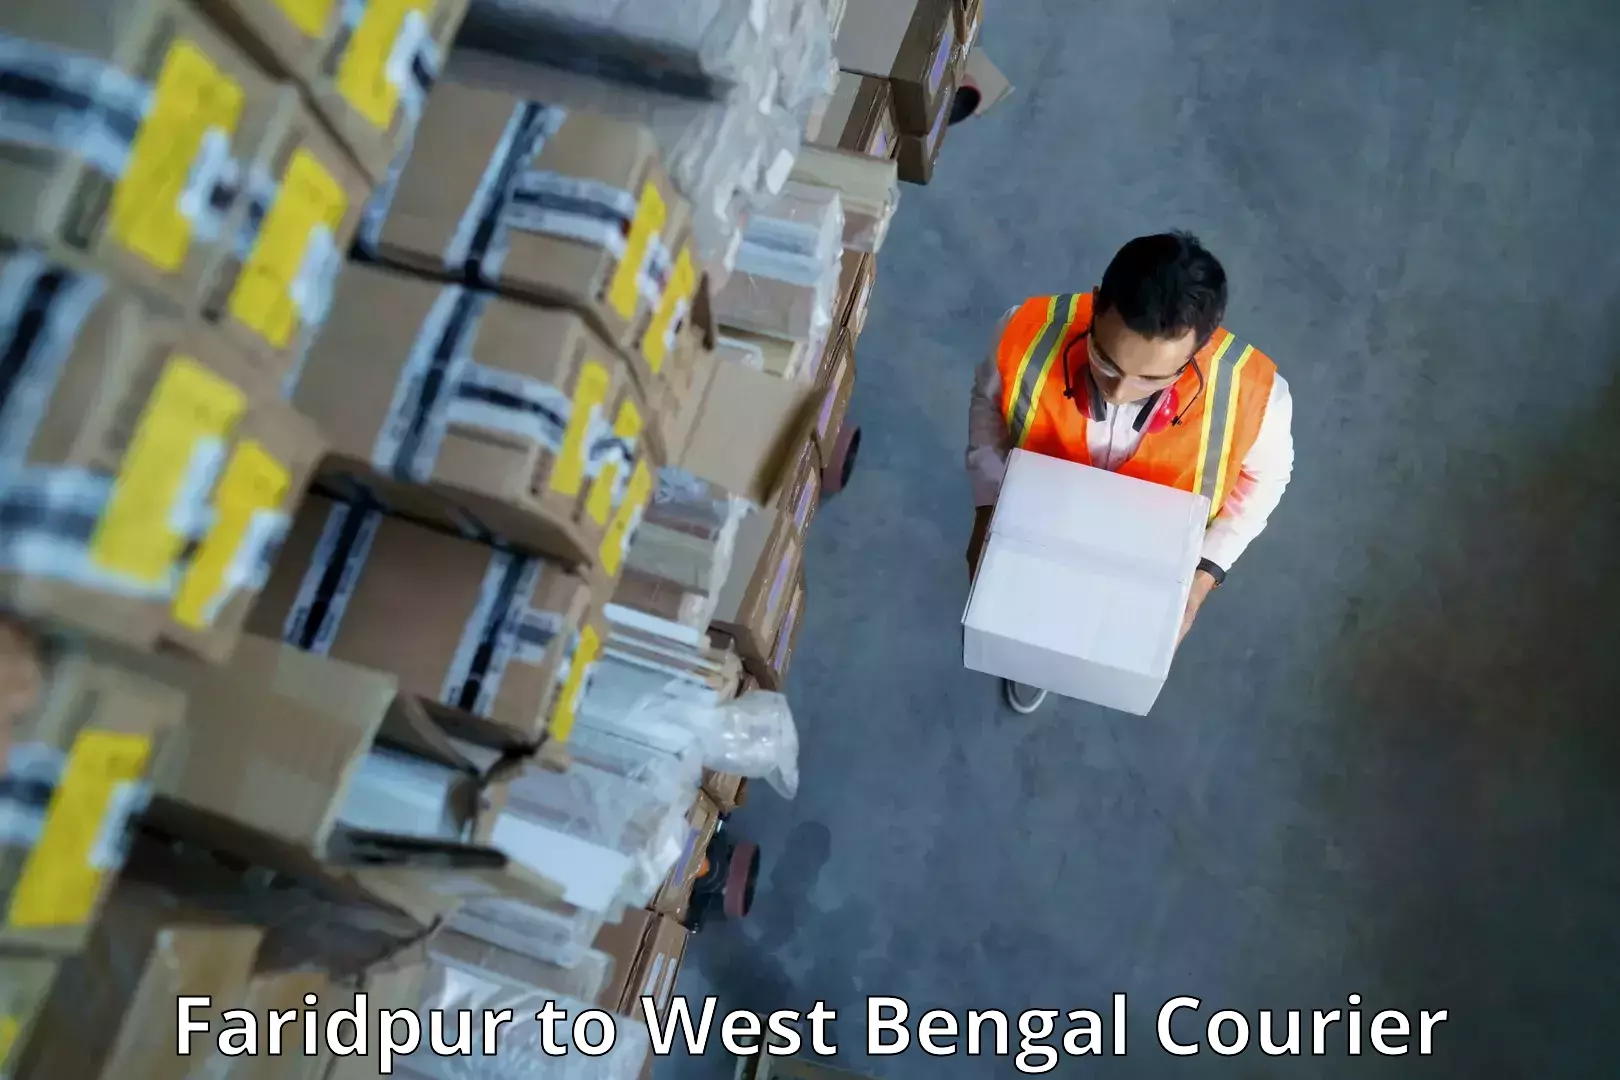 Easy access courier services in Faridpur to West Bengal